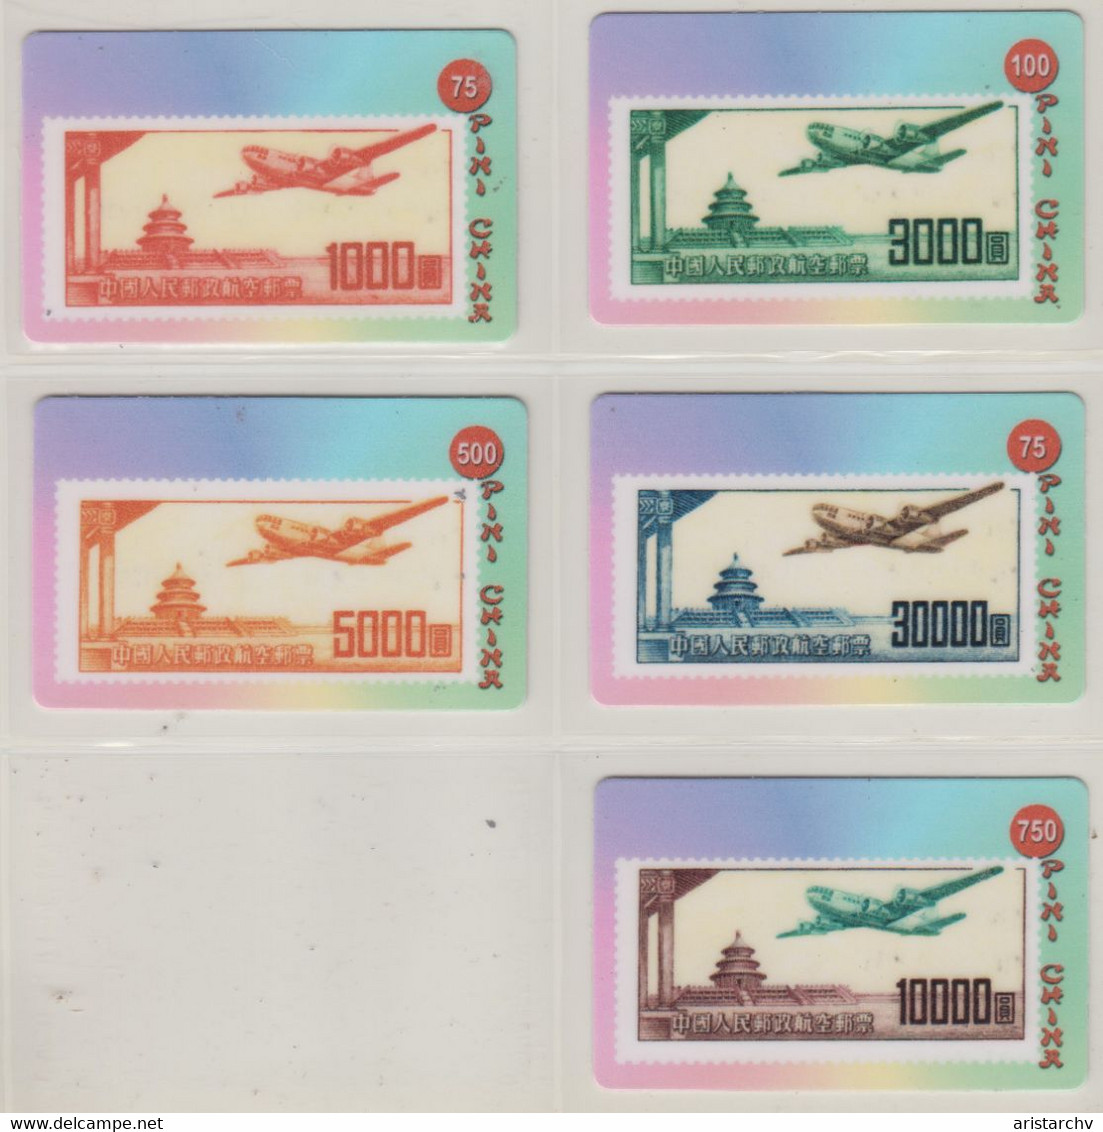 CHINA AVIATION PLANE STAMPS ON PHONE CARDS SET OF 5 CARDS - Sellos & Monedas